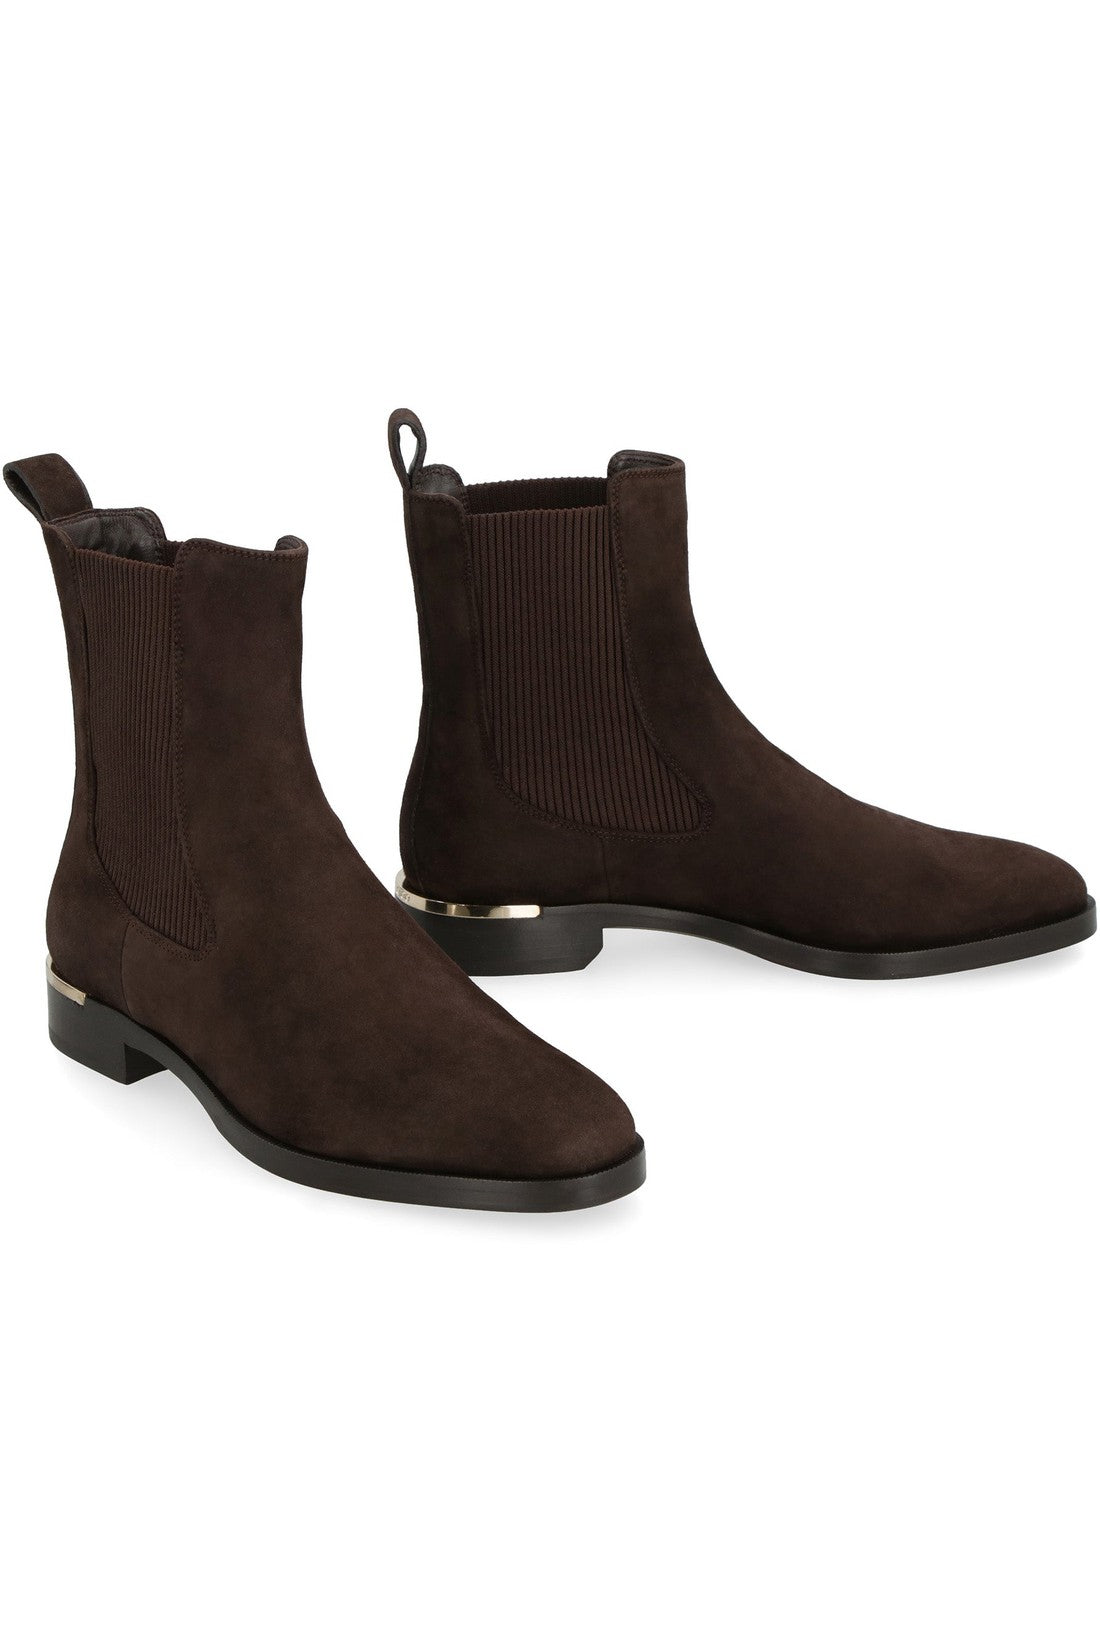 Jimmy Choo-OUTLET-SALE-The Sally suede chelsea boots-ARCHIVIST